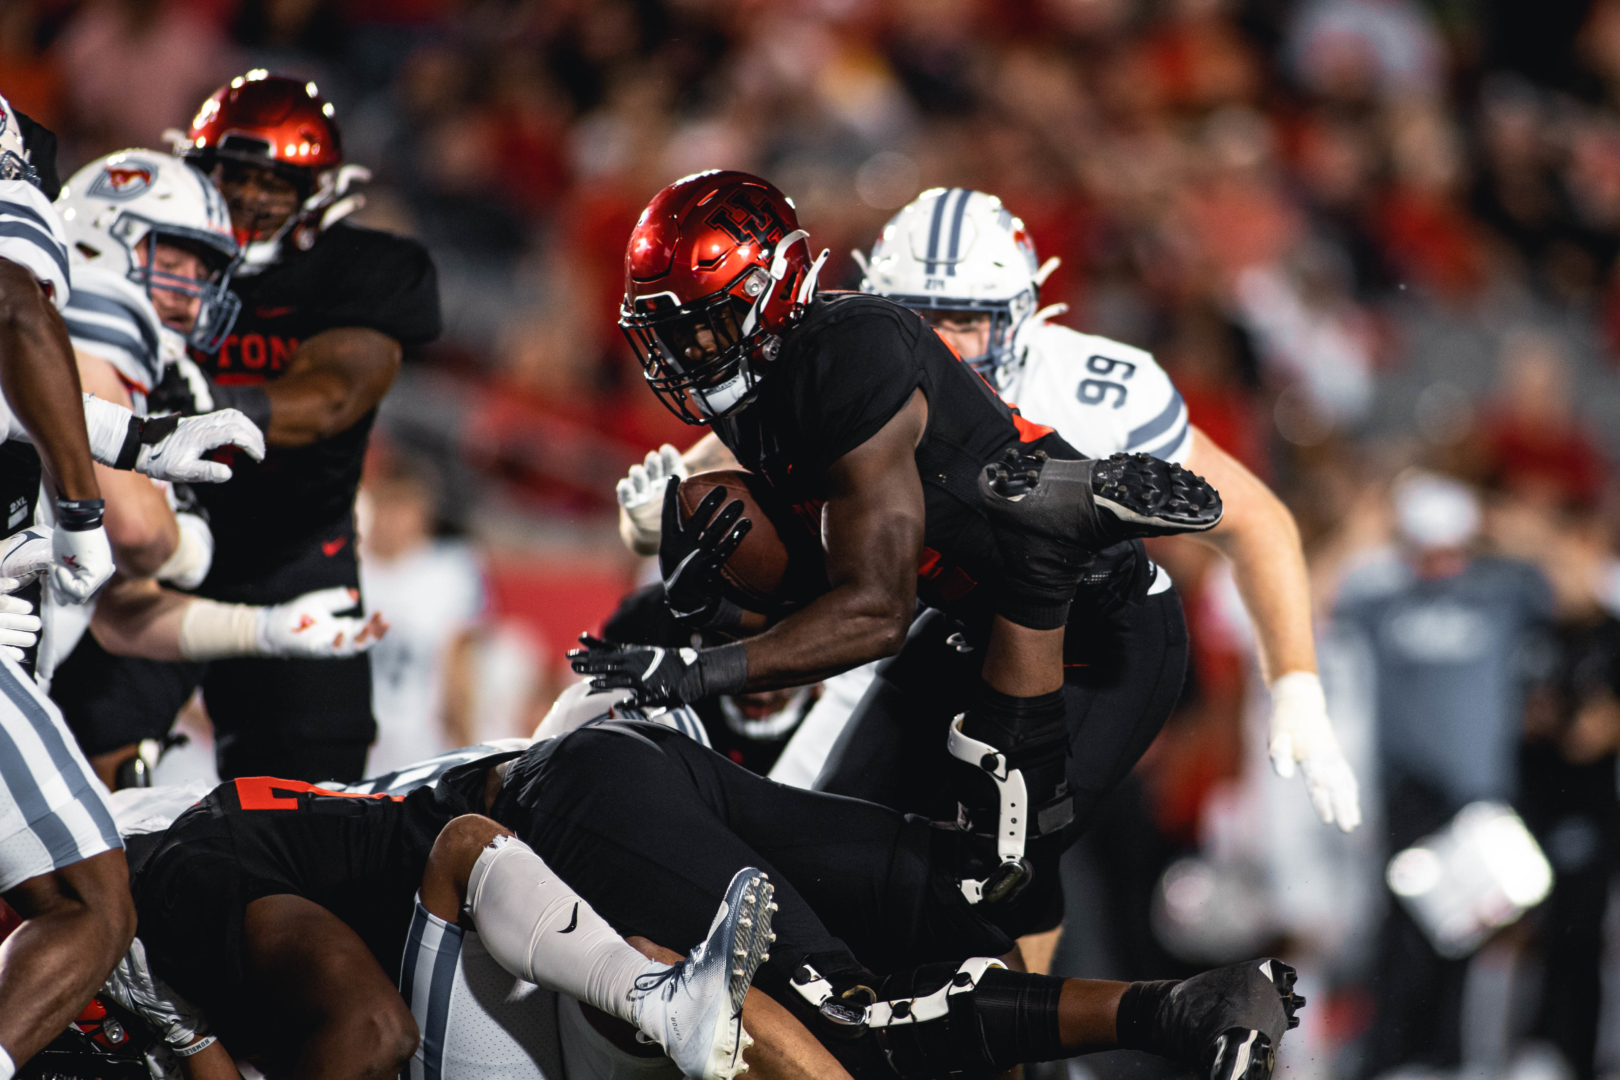 UH picked up the biggest win in the AAC in week nine, handing SMU its first loss of the season. | James Schillinger/The Cougar